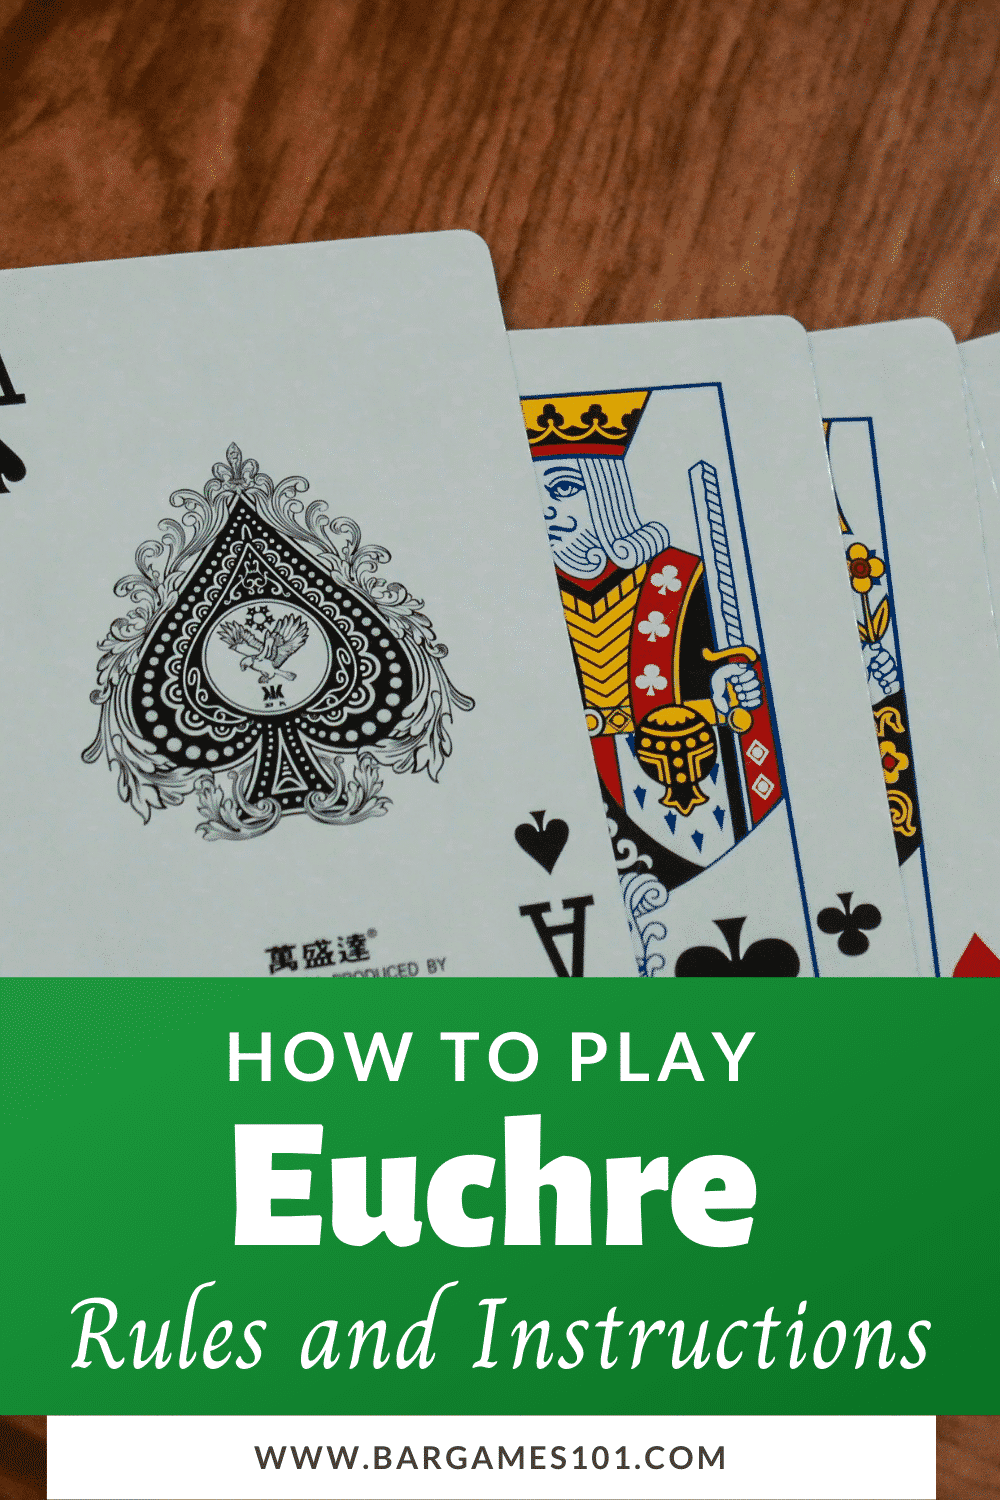 how-to-play-euchre-rules-and-instructions-bar-games-101